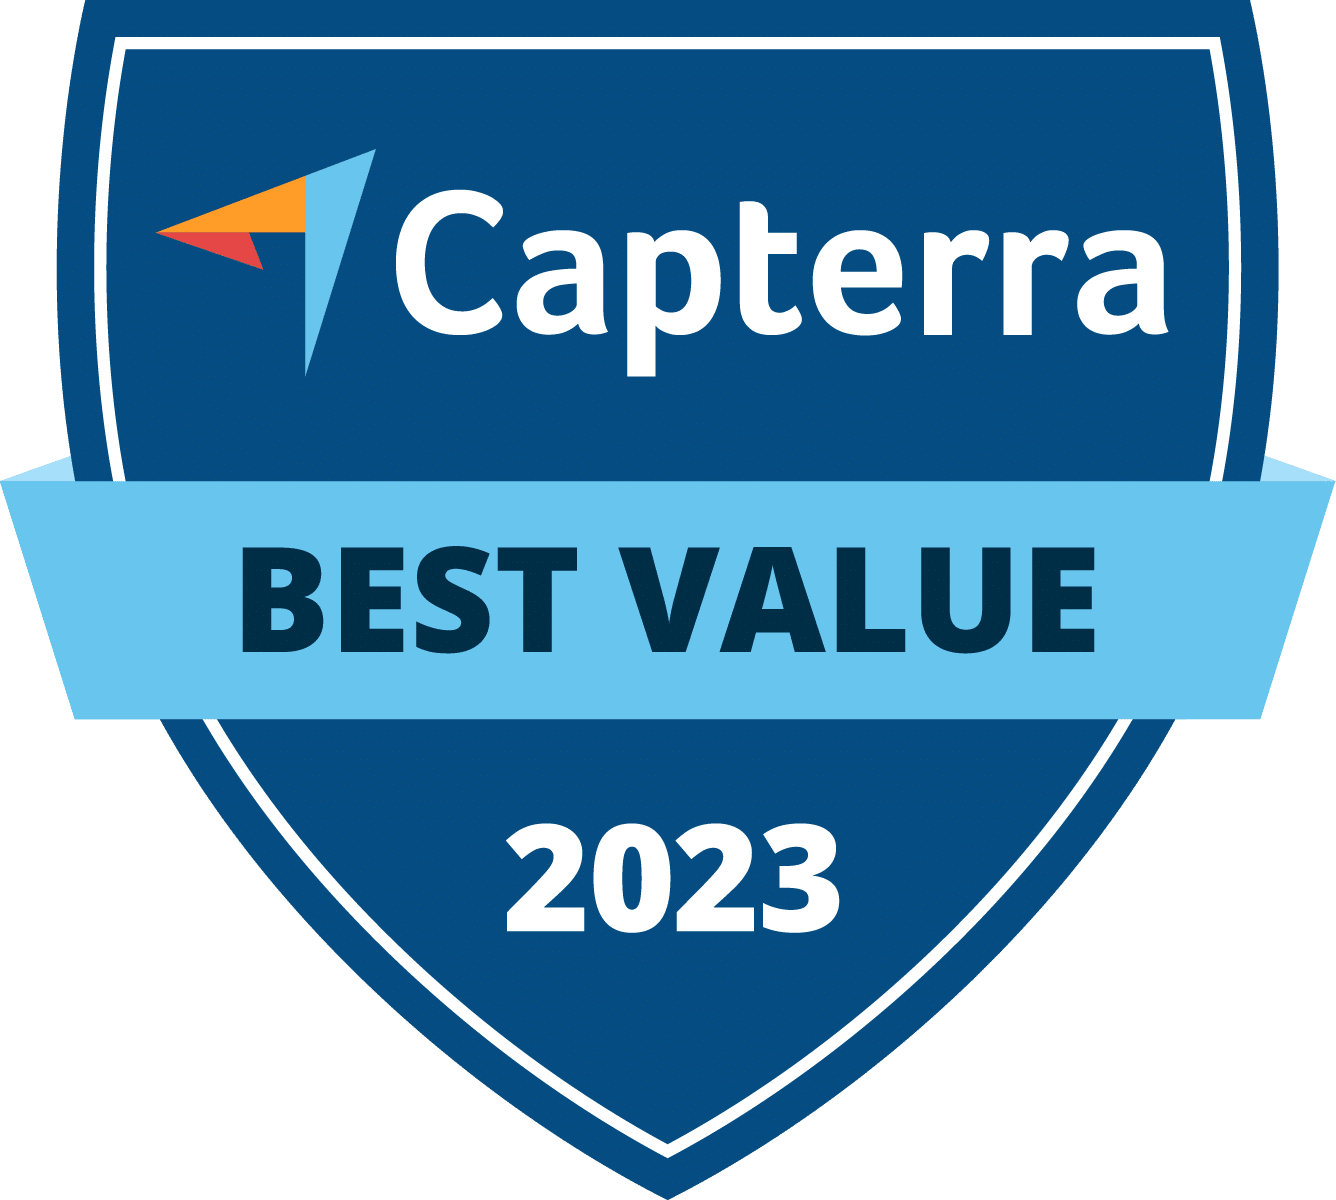 MyCase is awarded Best Value by Capterra in 2023